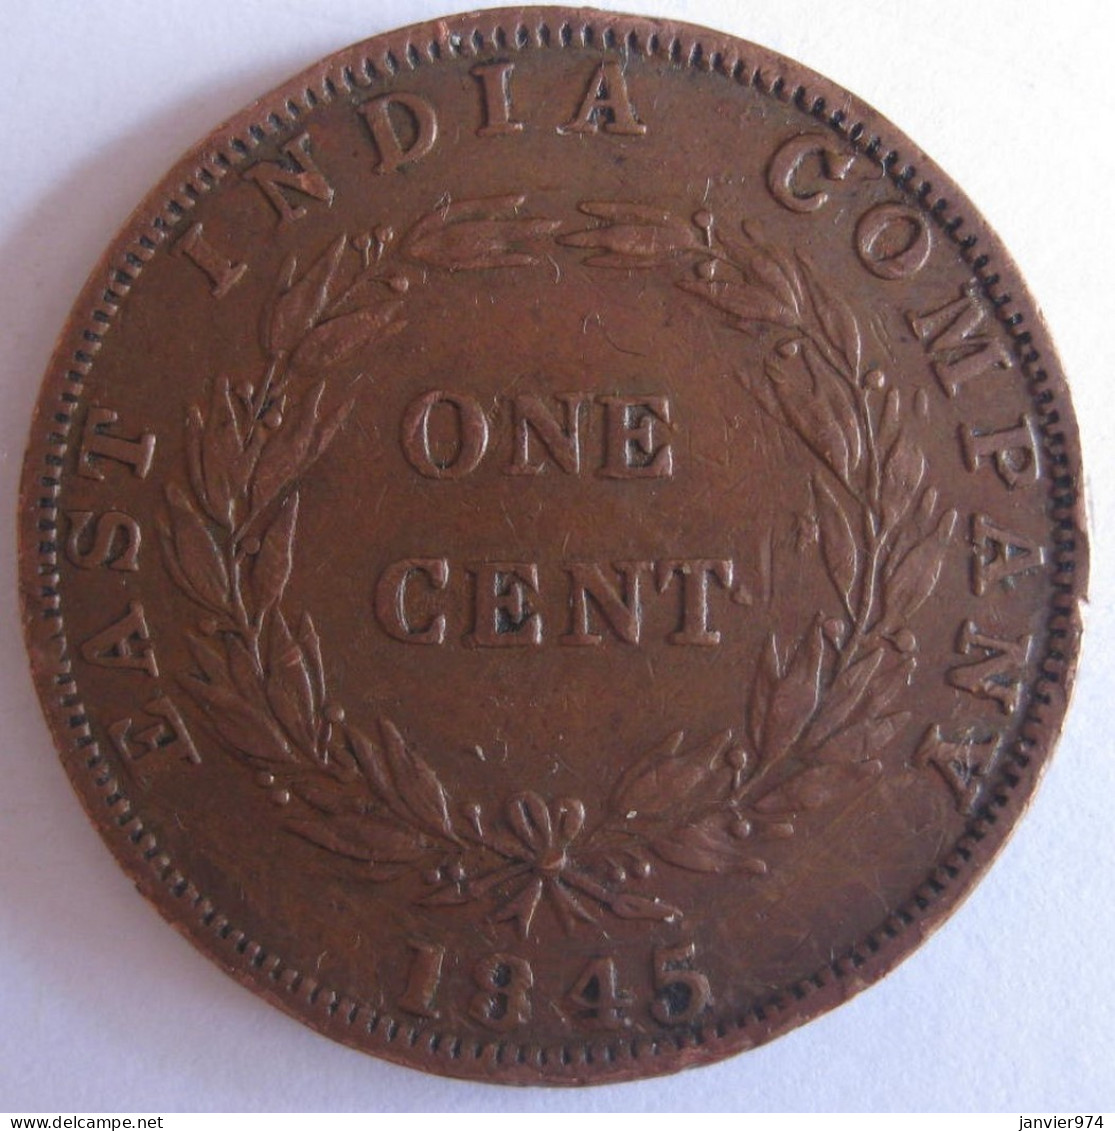 East India Company One Cent 1845. Victoria. Straits Settlements. KM# 3 - Malaysie